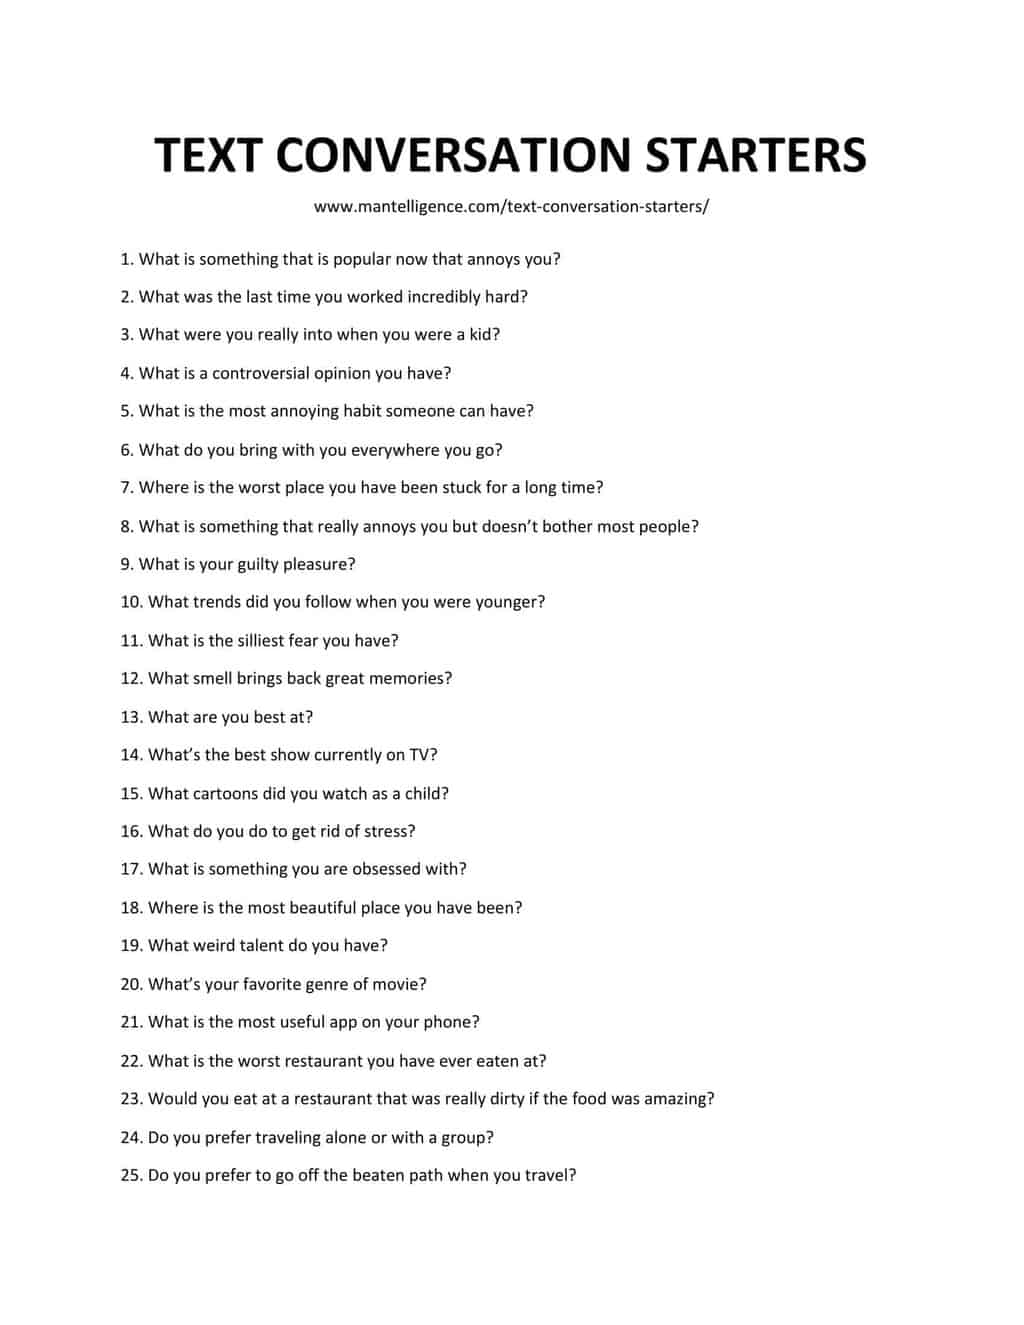 Downloadable and Printable list of Text Conversation Starters as jpg/pdf